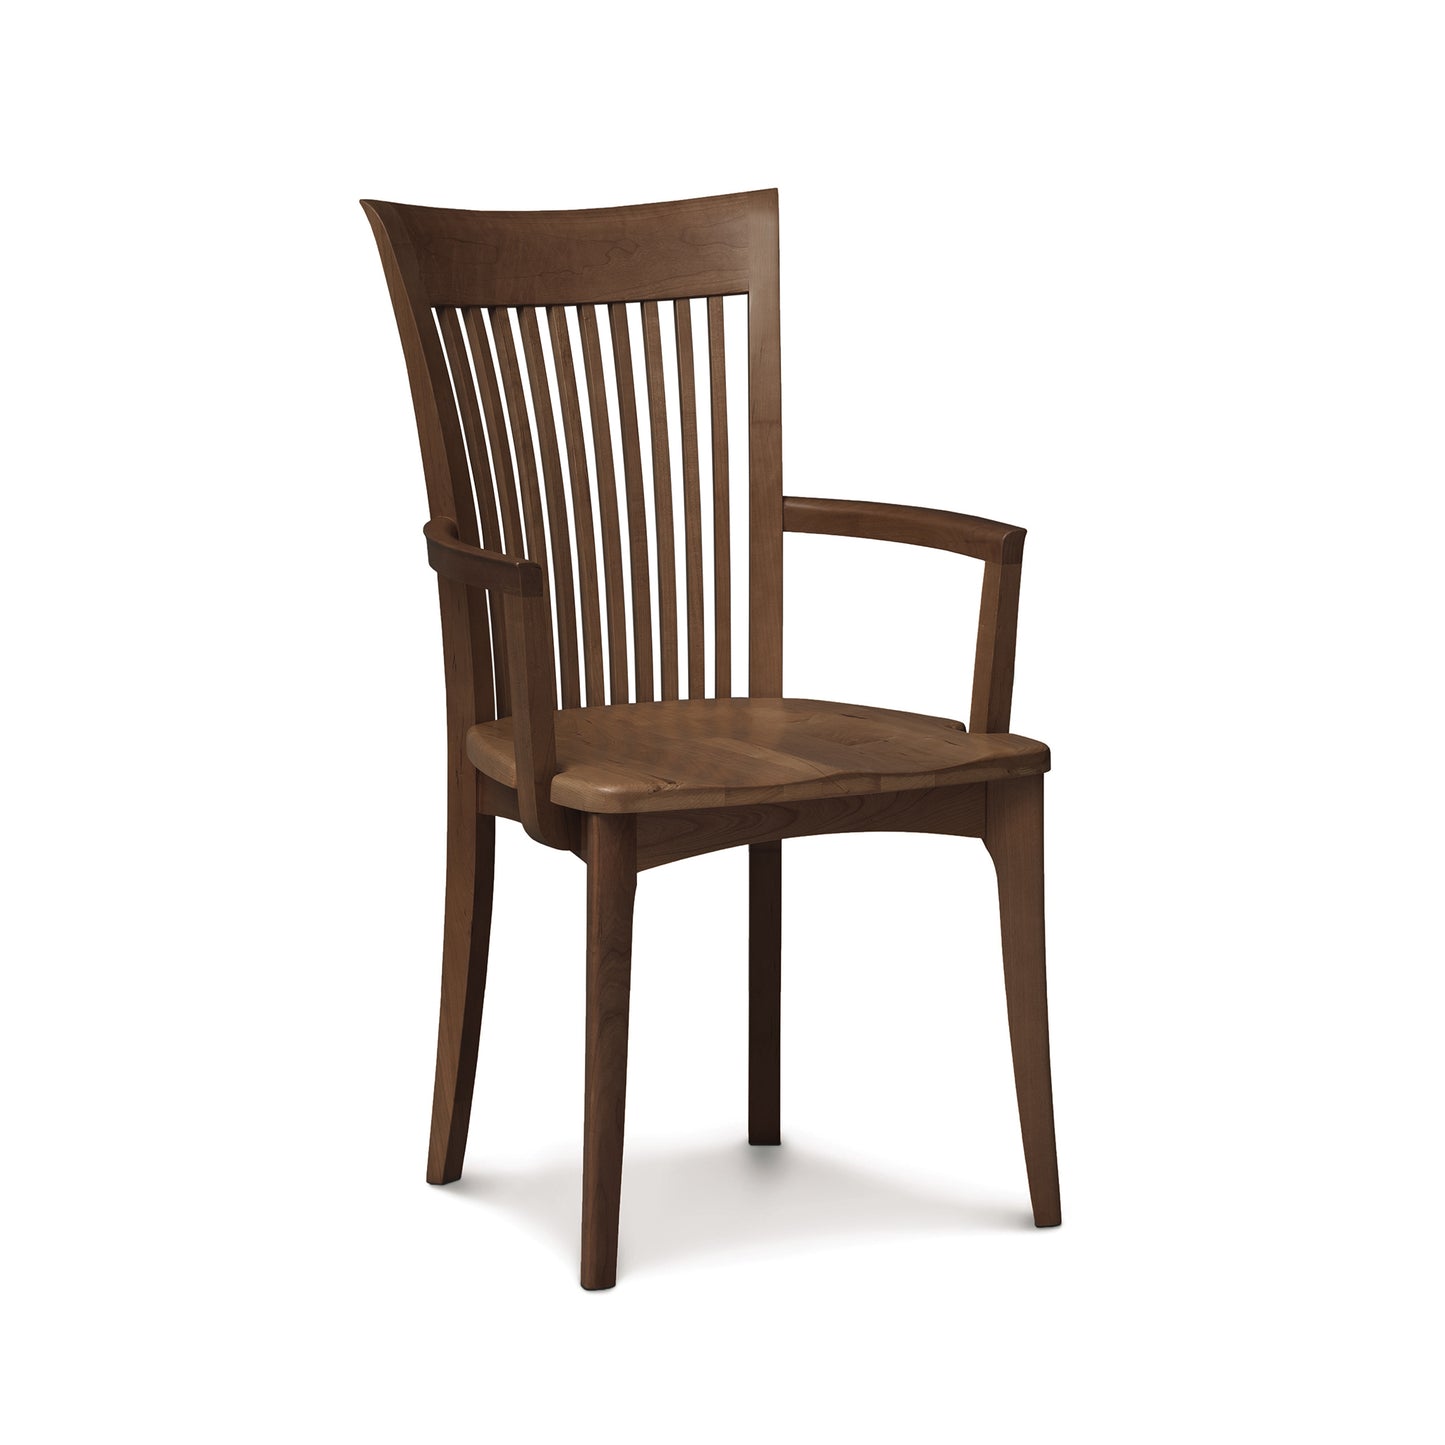 A Copeland Furniture Sarah Shaker Cherry Chair with Wooden Seat, made from solid American cherry wood, with a slatted backrest and armrests, isolated against a white background.